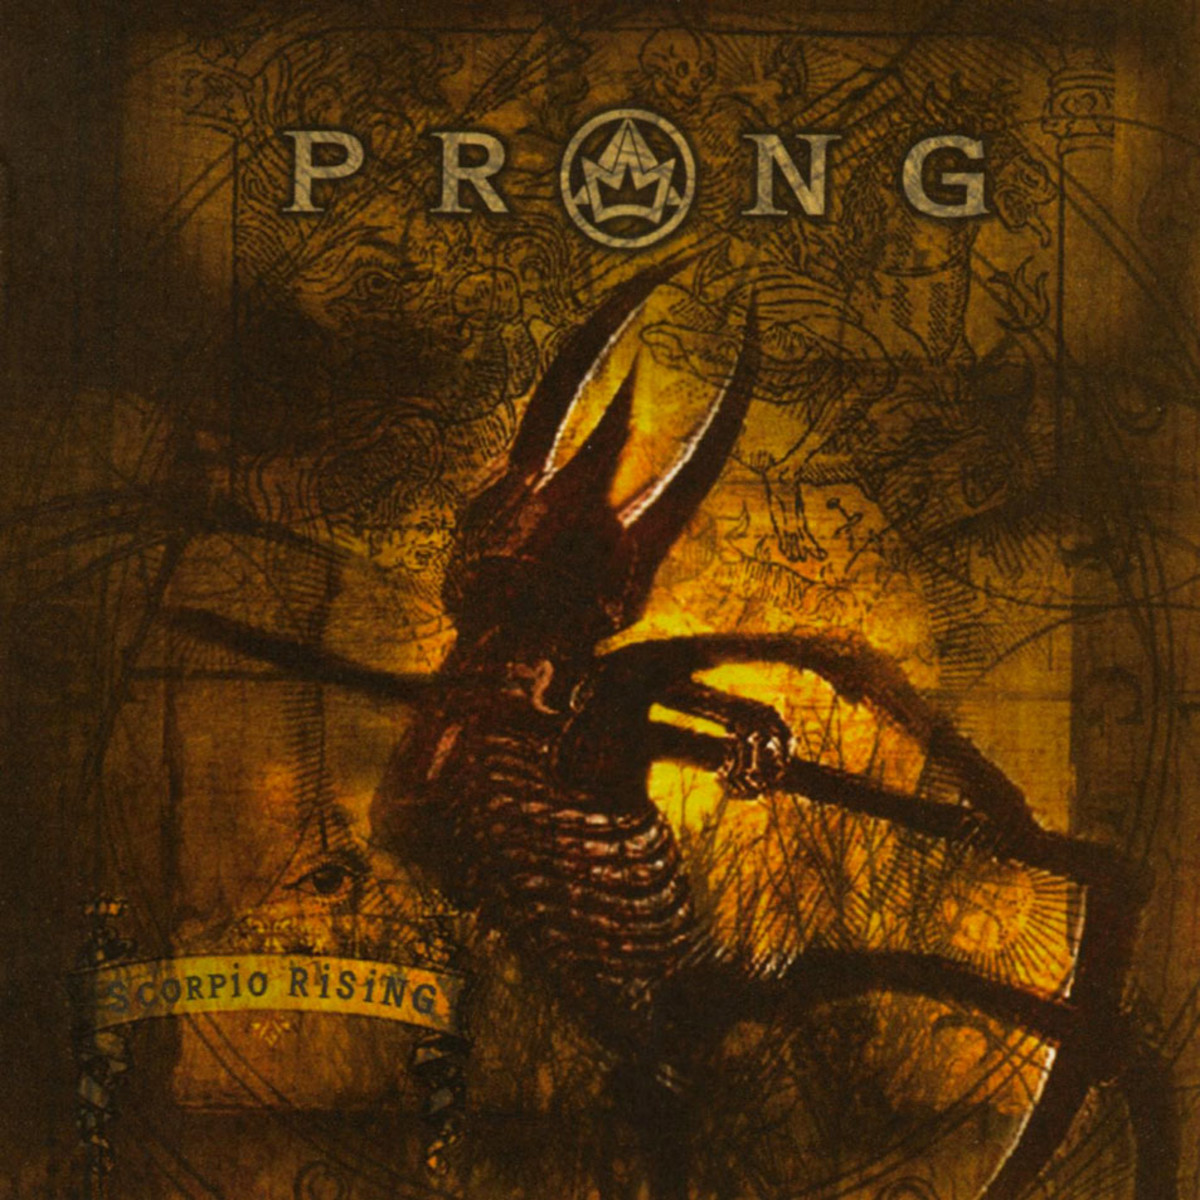 The front album cover for Scorpio Rising has a scorpion in the middle of it which is interesting because the band took out the letter n when composing the album's title.